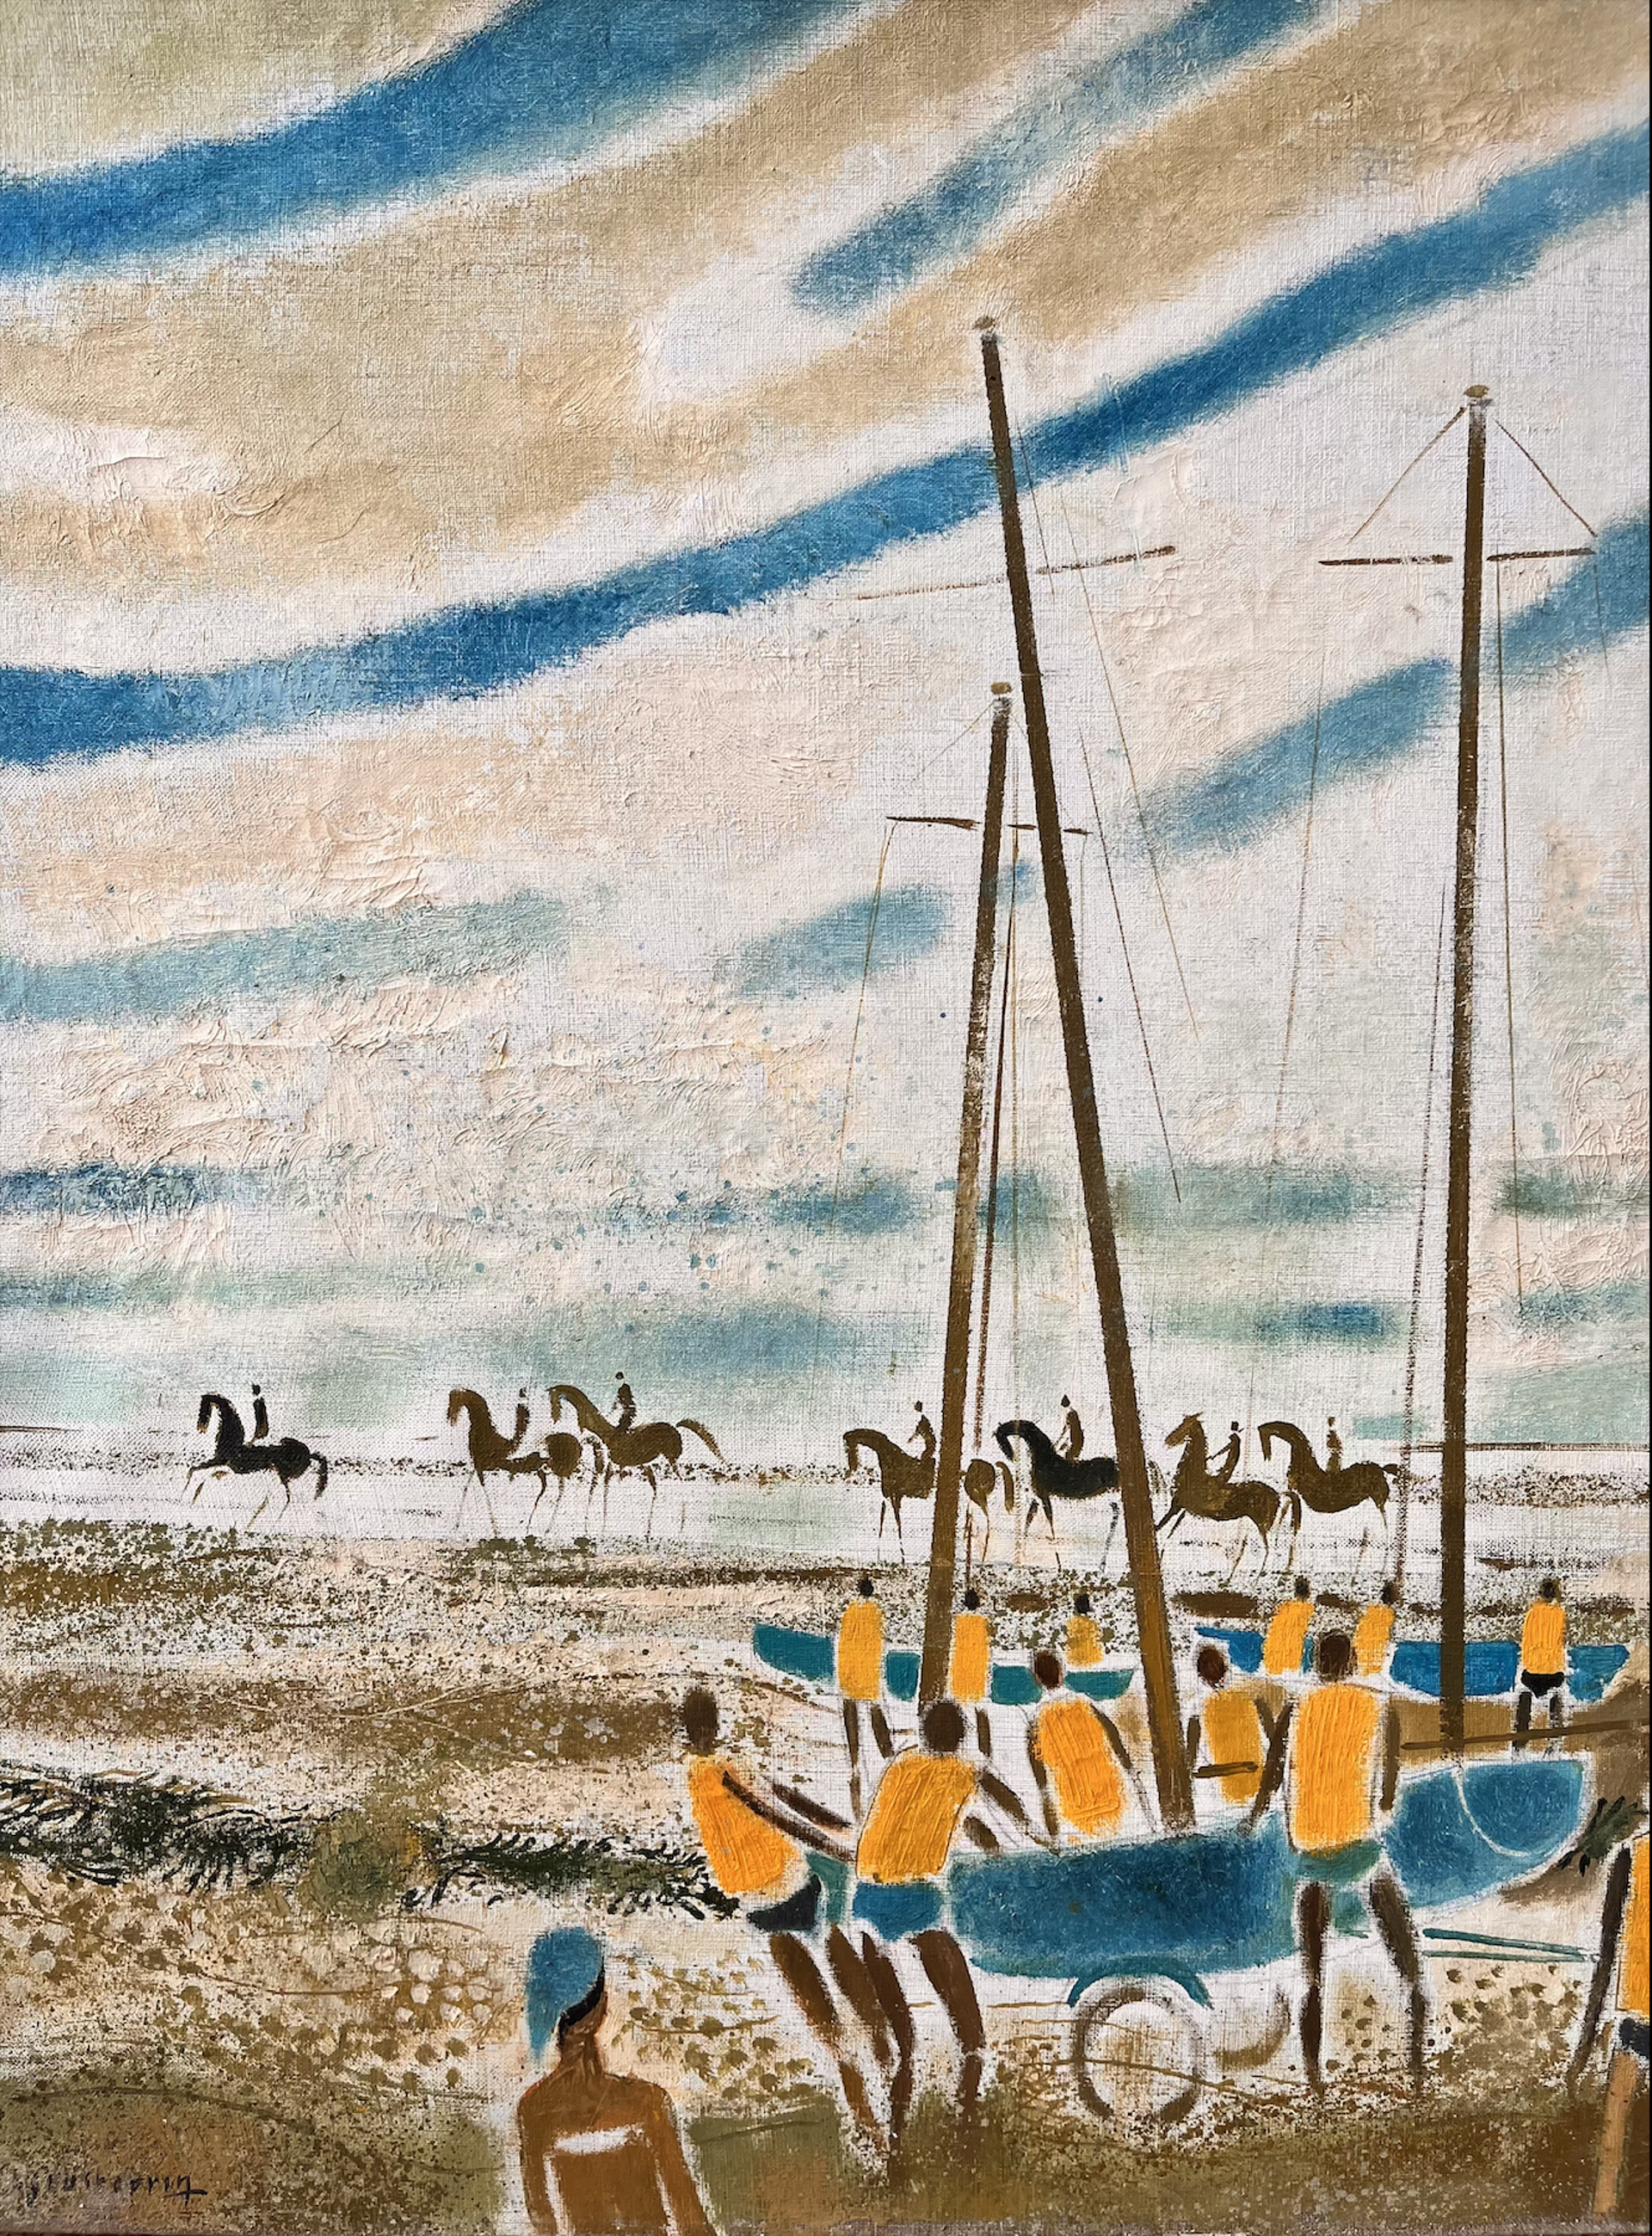 Trouville a Maree Basse by Claude Grosperrin